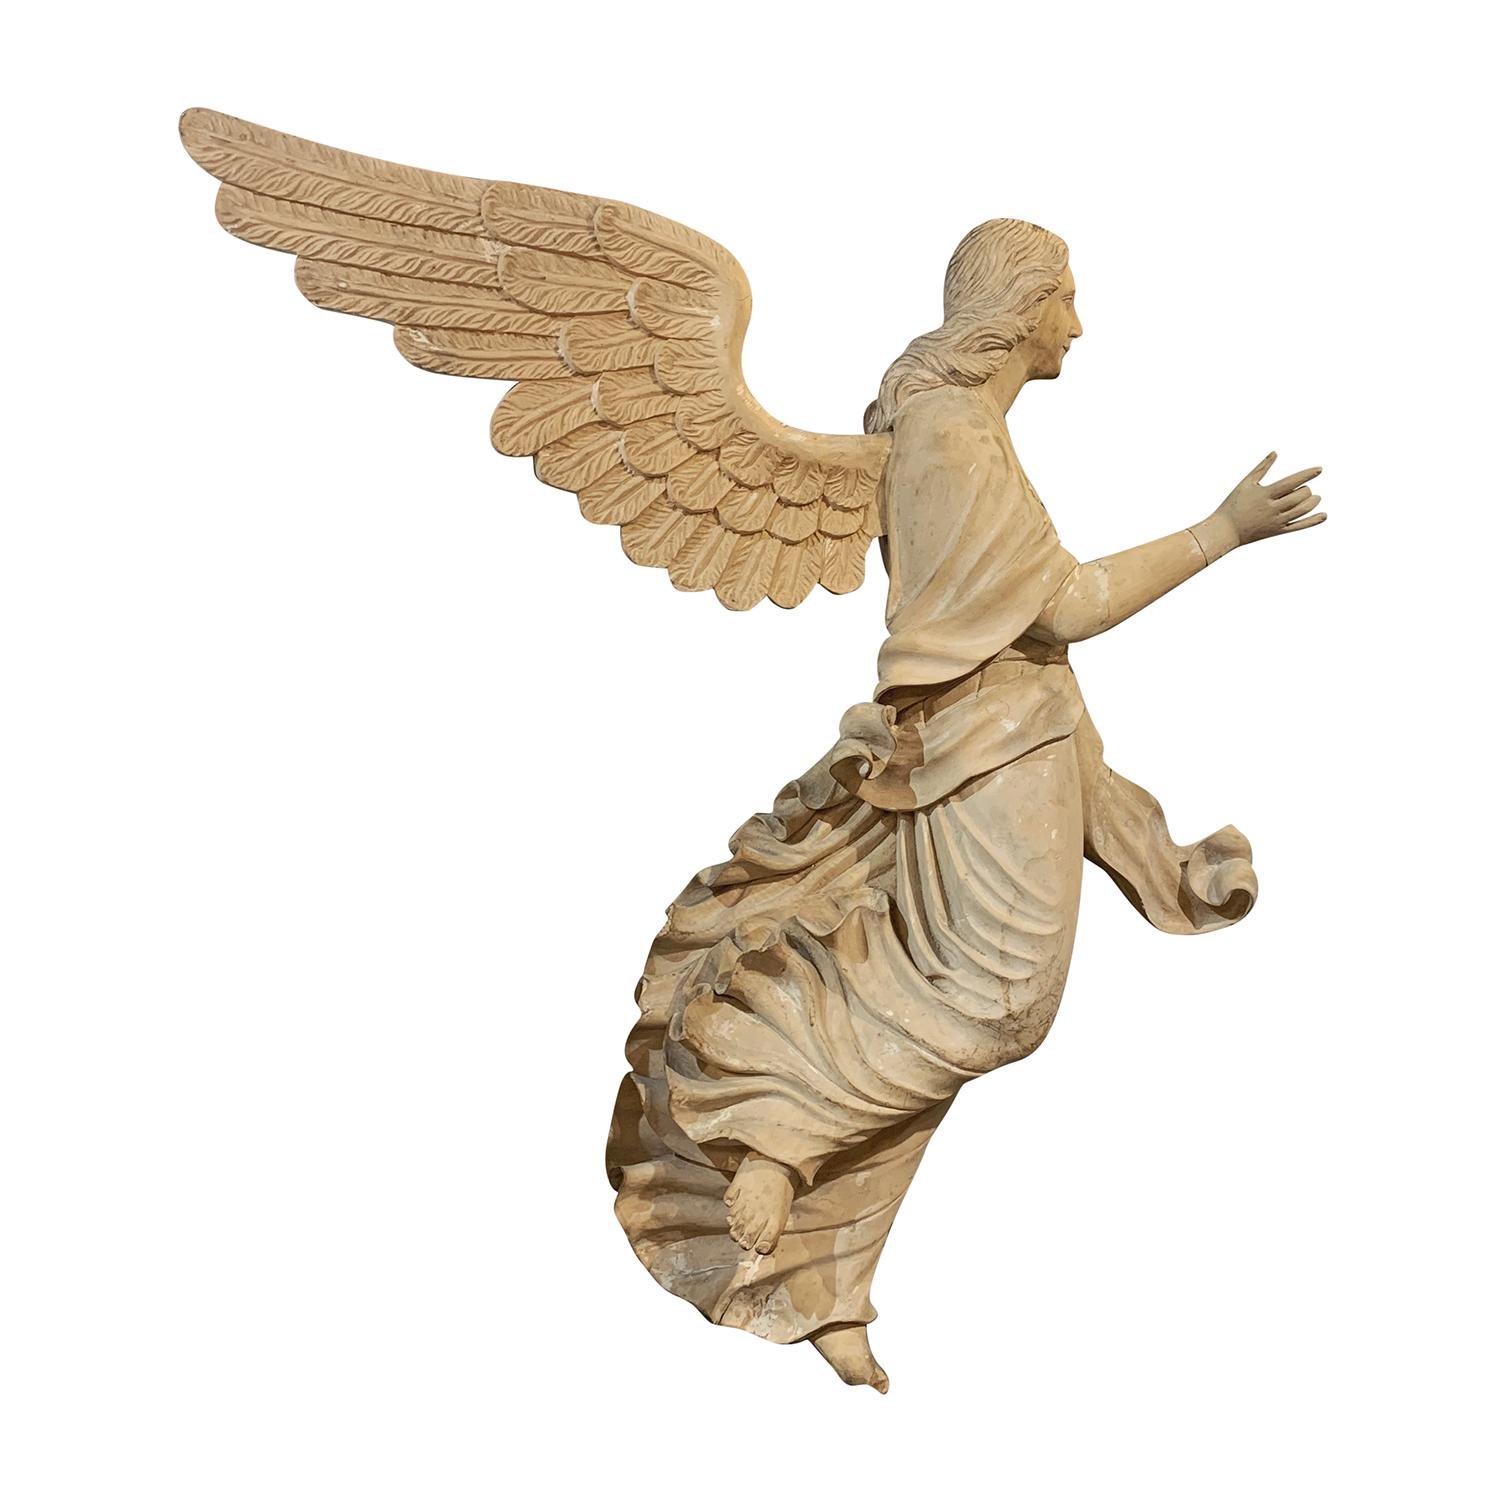 An antique Italian pair of early 19th century half ?relief wooden angels made of hand carved Basswood, enhanced by unique wood carvings, in good condition. Wear consistent with age and use. Minor damages due to age, circa 1810-1830, South Tyrol,